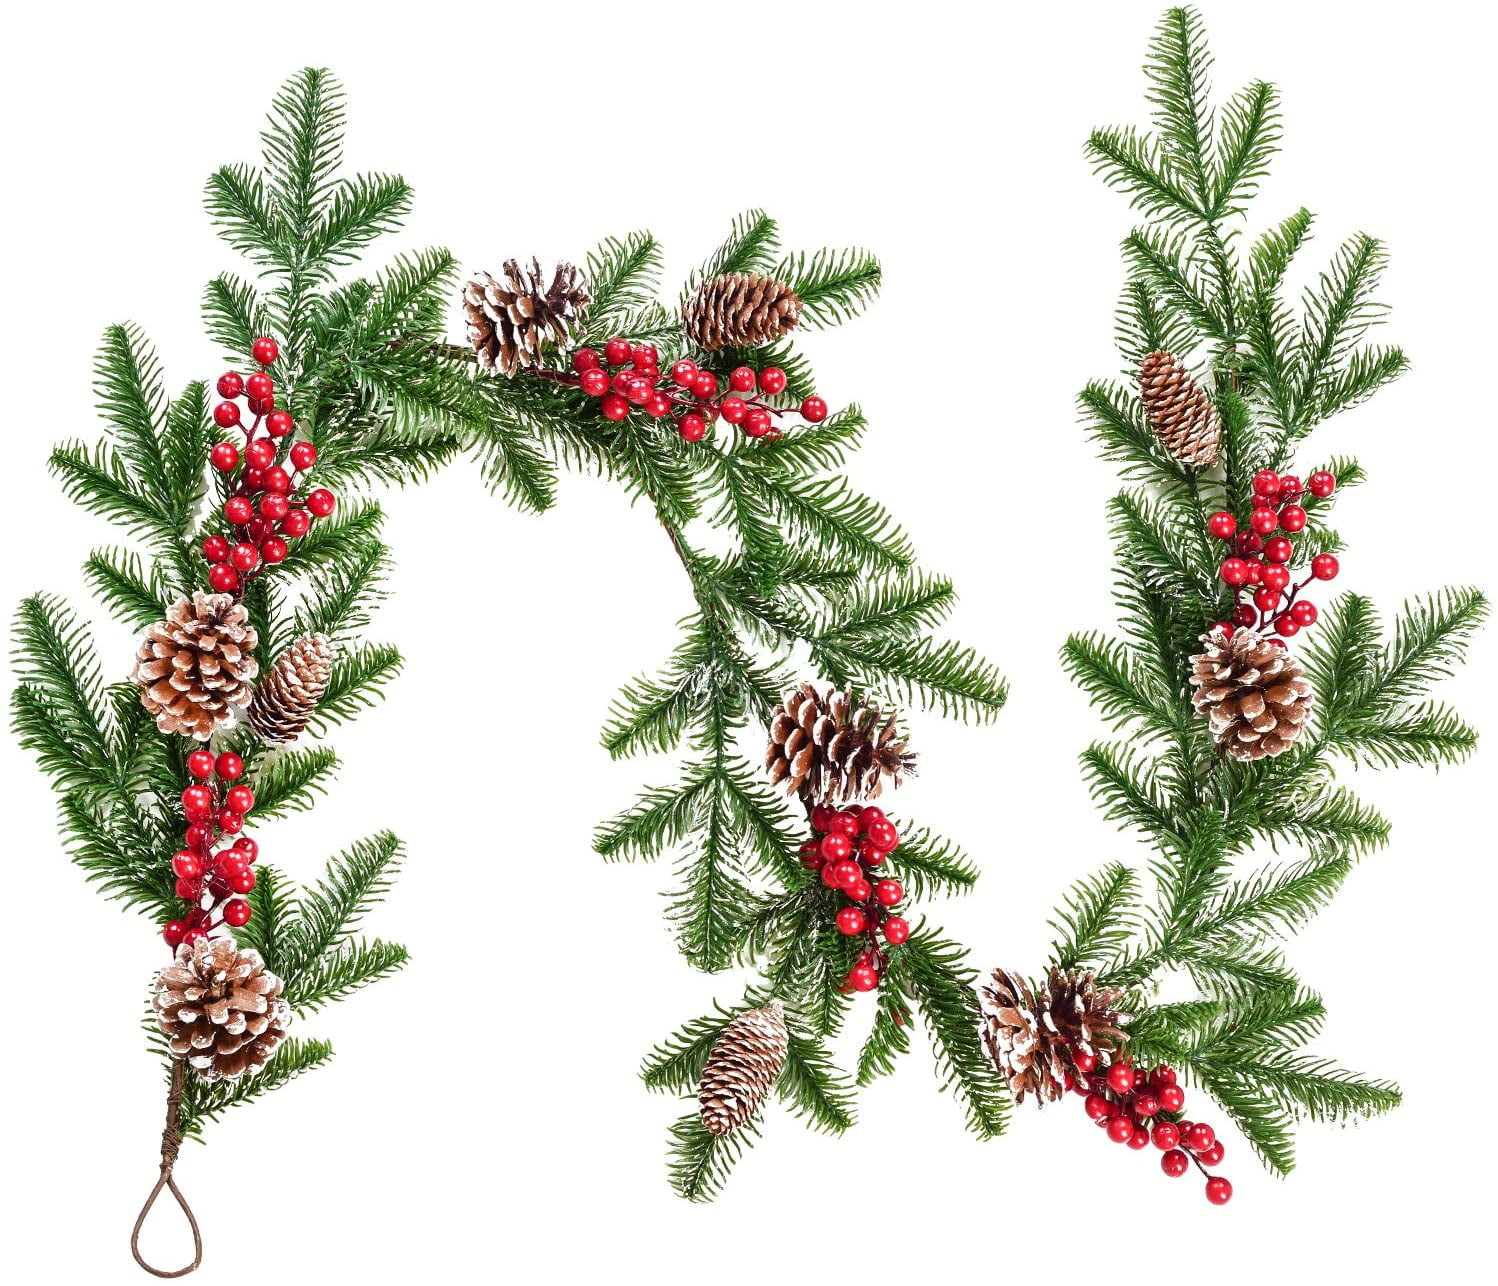 Fomlily Red Berry Pine Garland Christmas Decoration, 6ft Christmas Garland  Greenery with Eucalyptus Leaves Red Berries and Pine Cones for Holiday